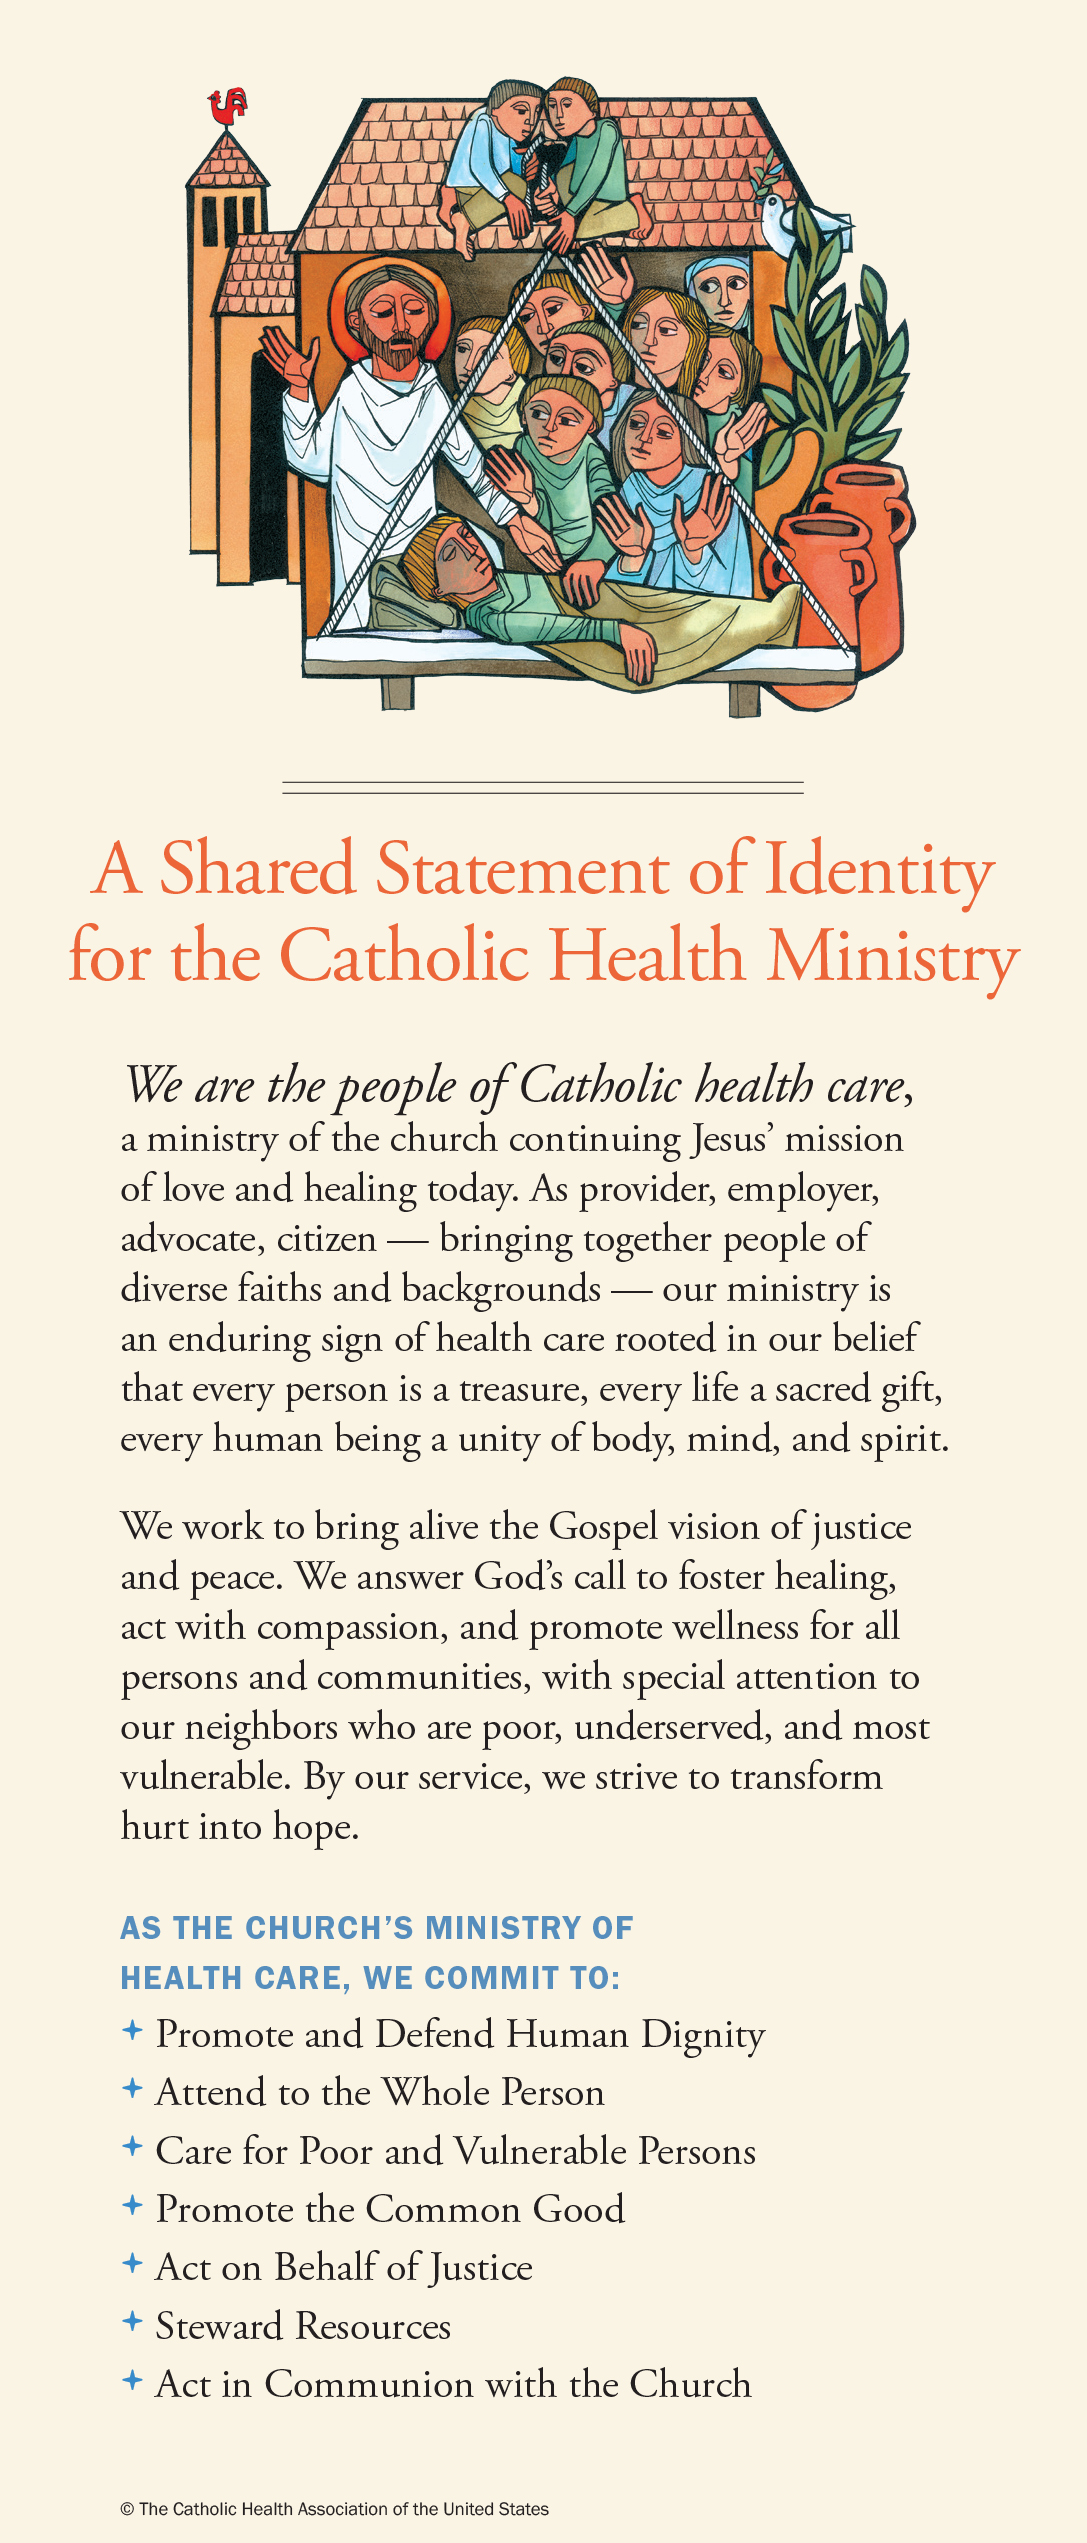 A Shared Statement of Identity for the Catholic Health Ministry